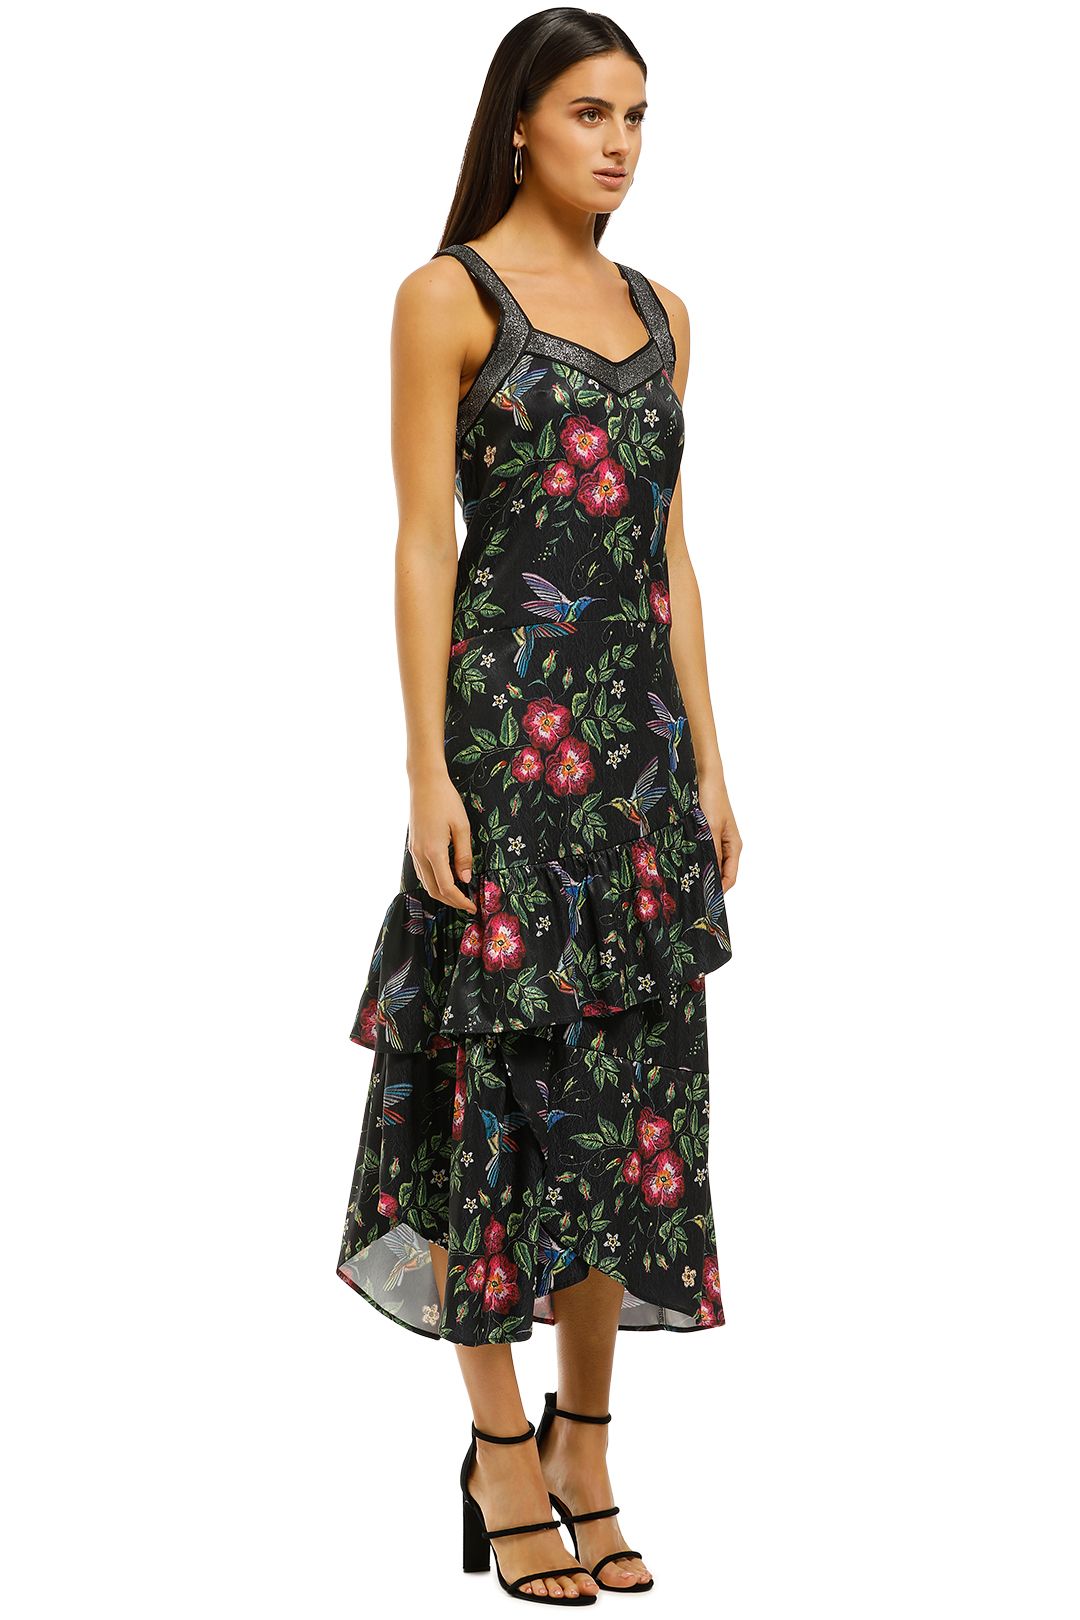 Curate-by-Trelise-Cooper-Ruffle-Feathers-Dress-Black-Floral-Side